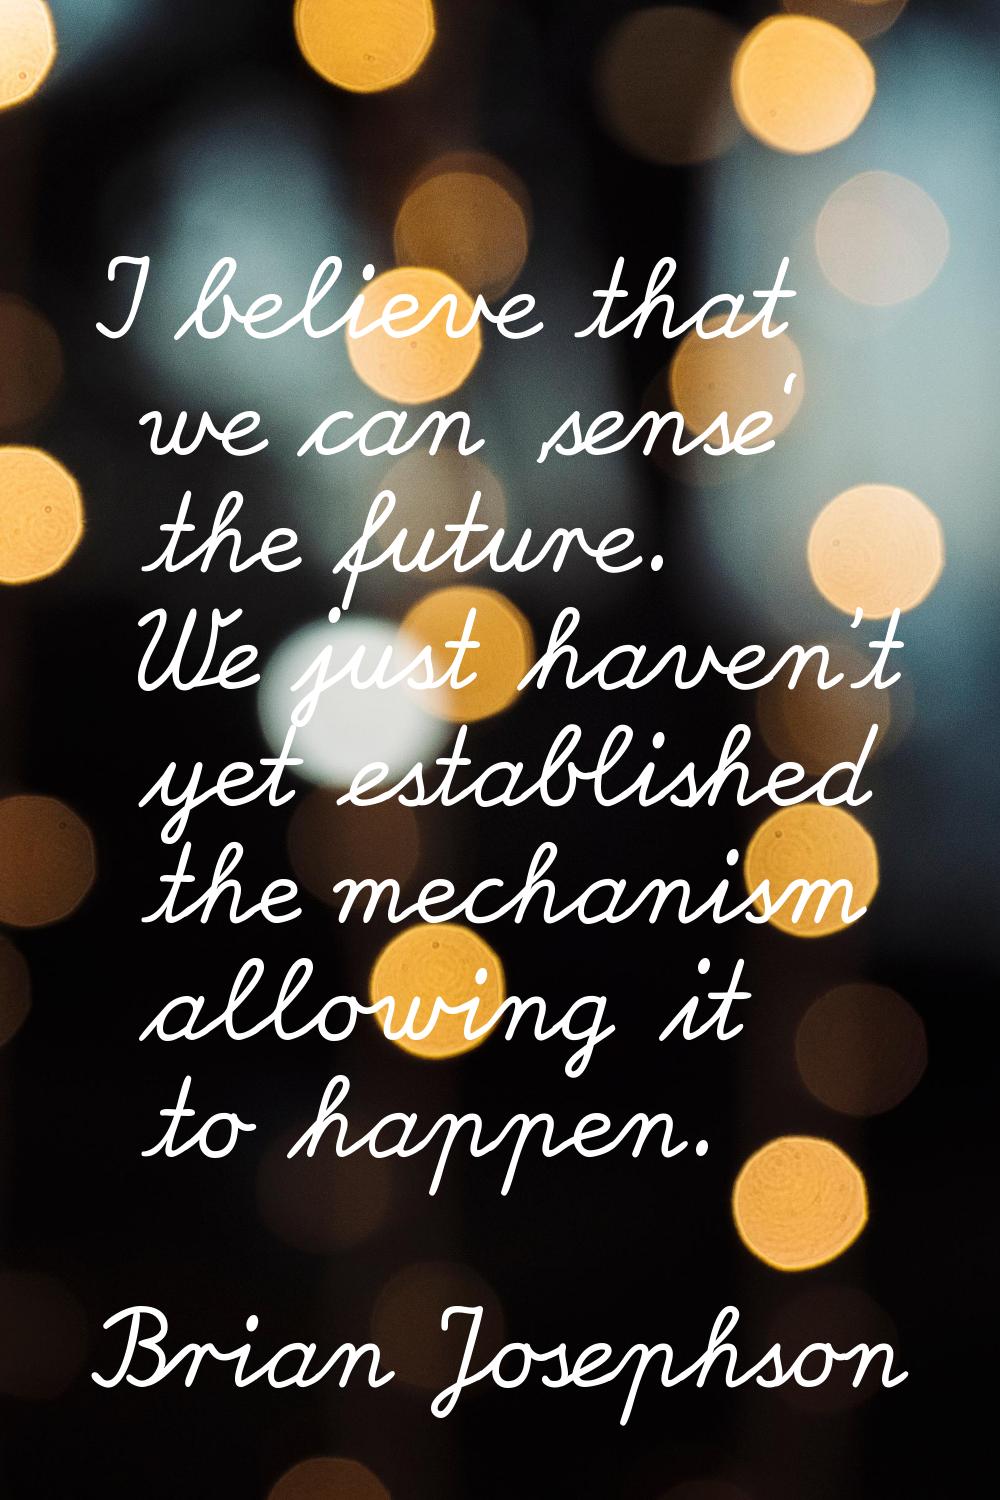 I believe that we can 'sense' the future. We just haven't yet established the mechanism allowing it